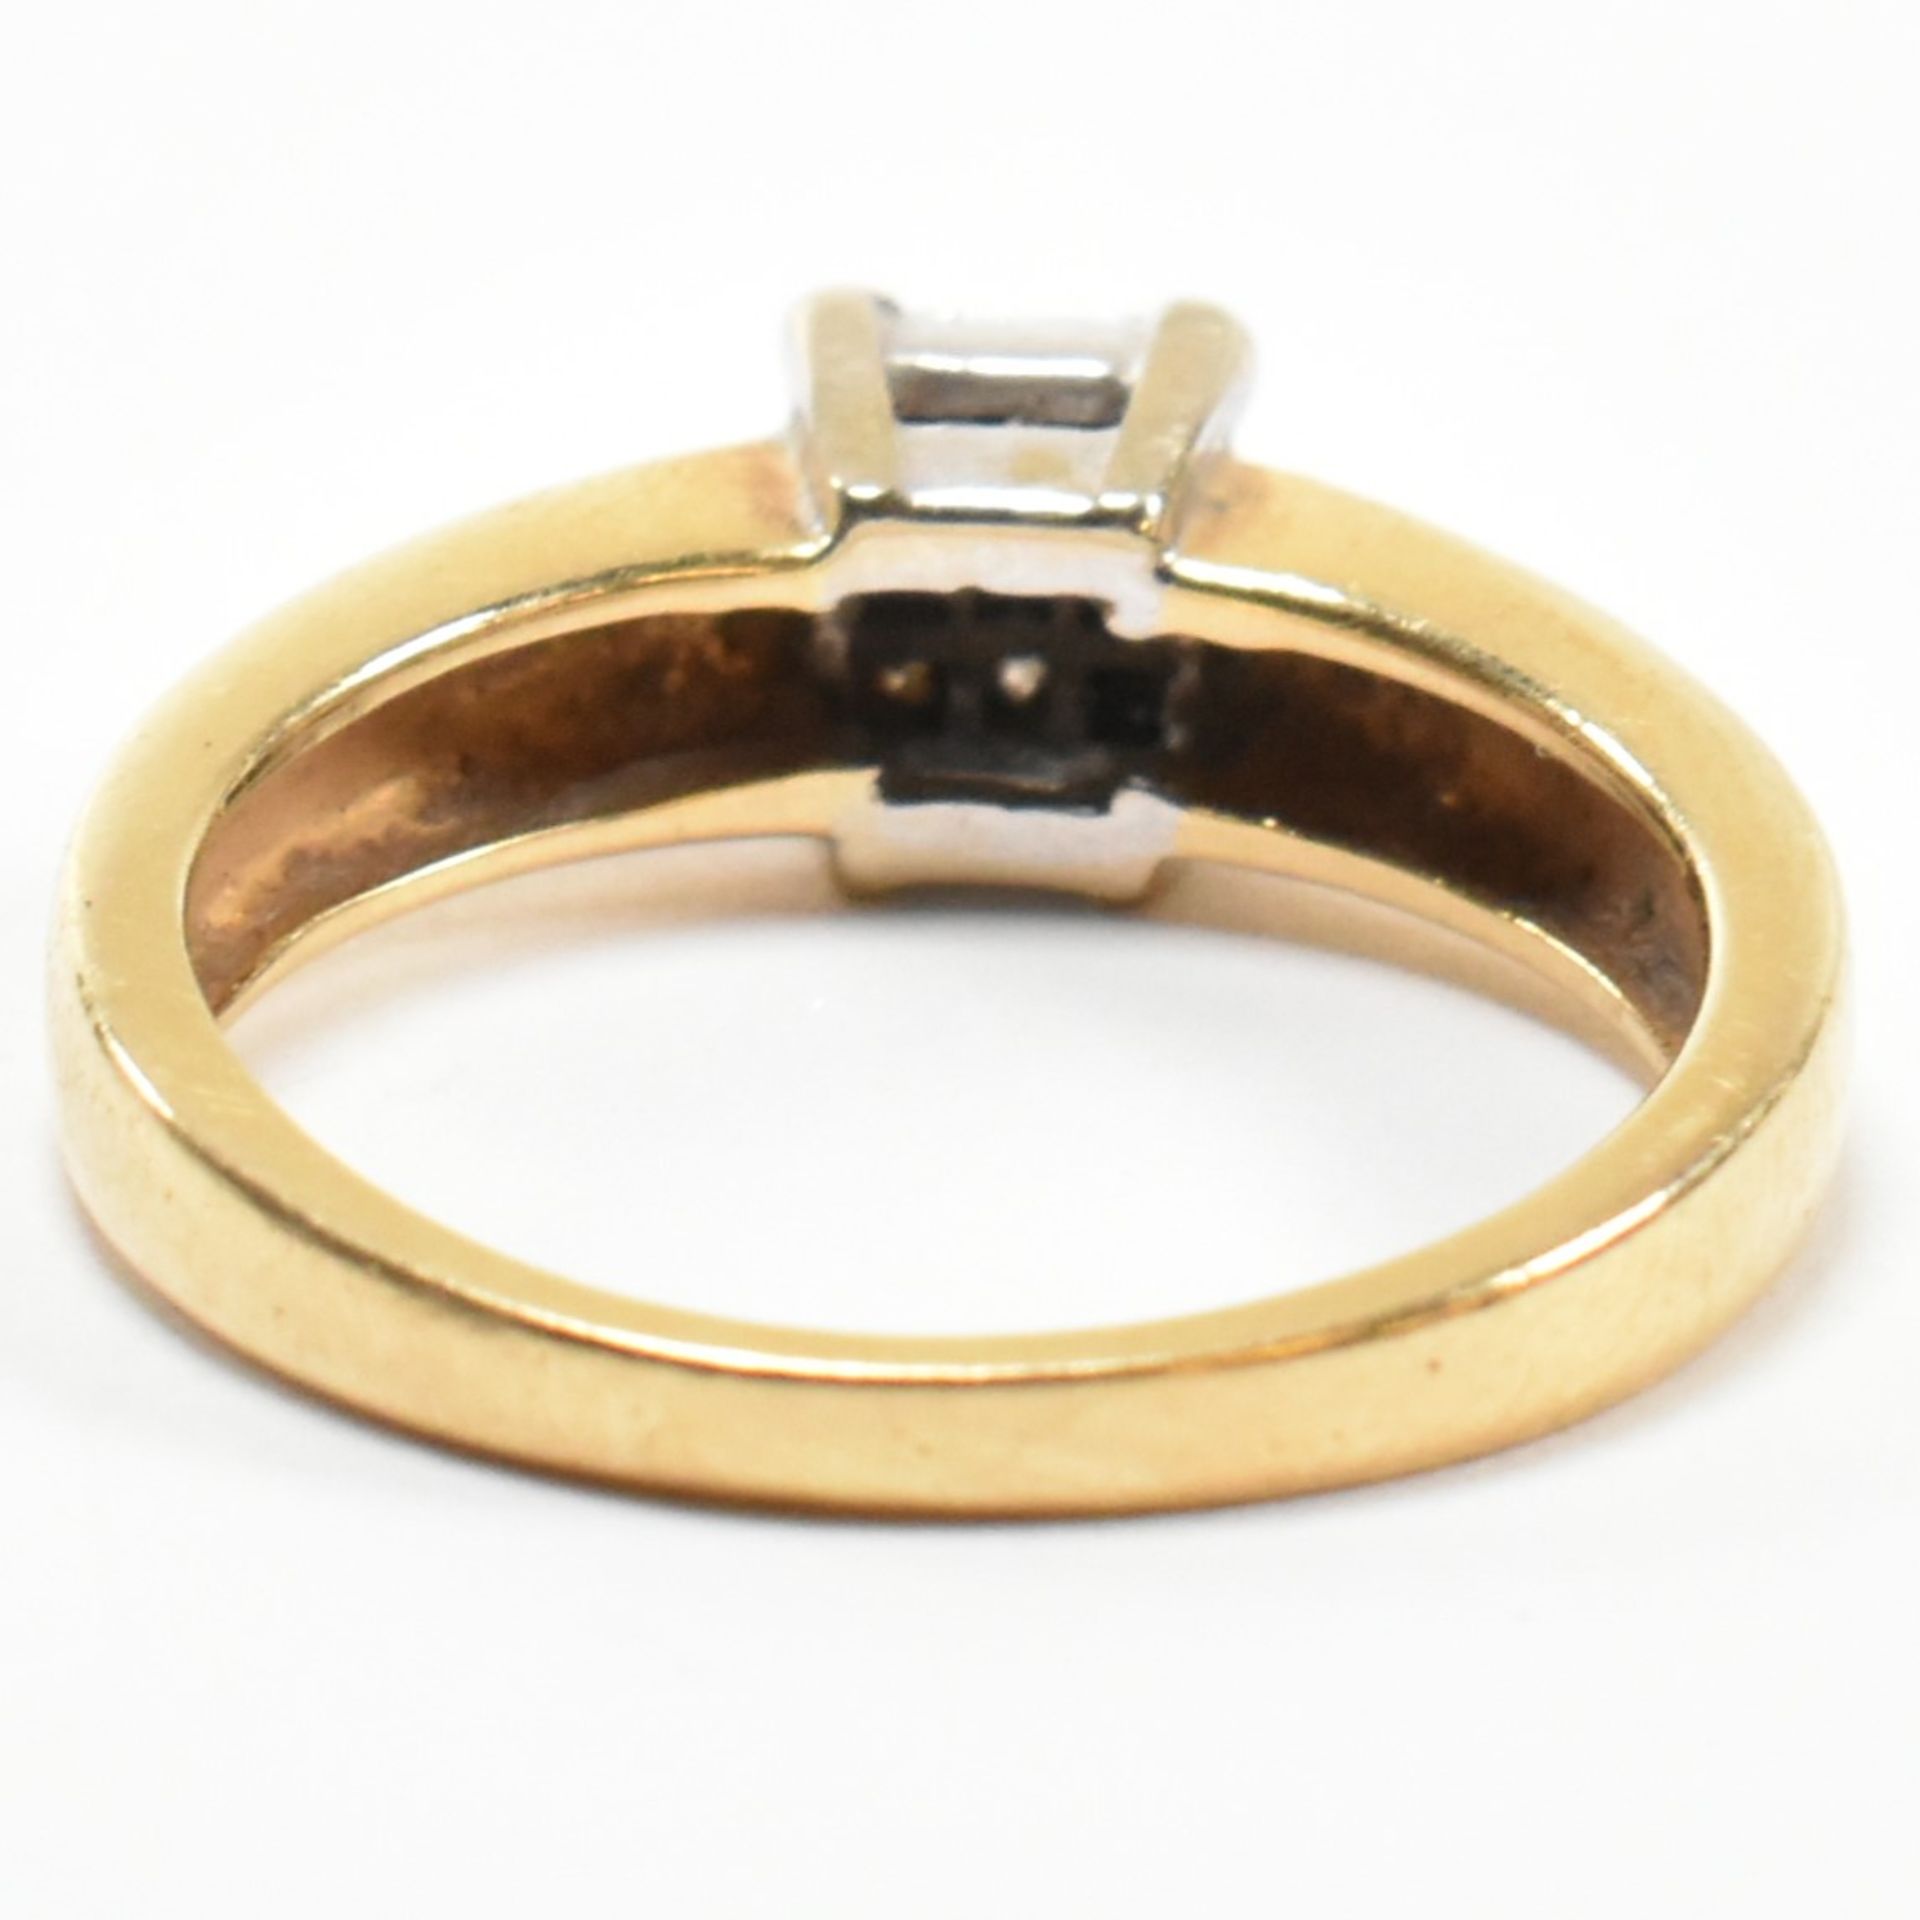 HALLMARKED 18CT GOLD & DIAMOND CLUSTER RING - Image 2 of 10